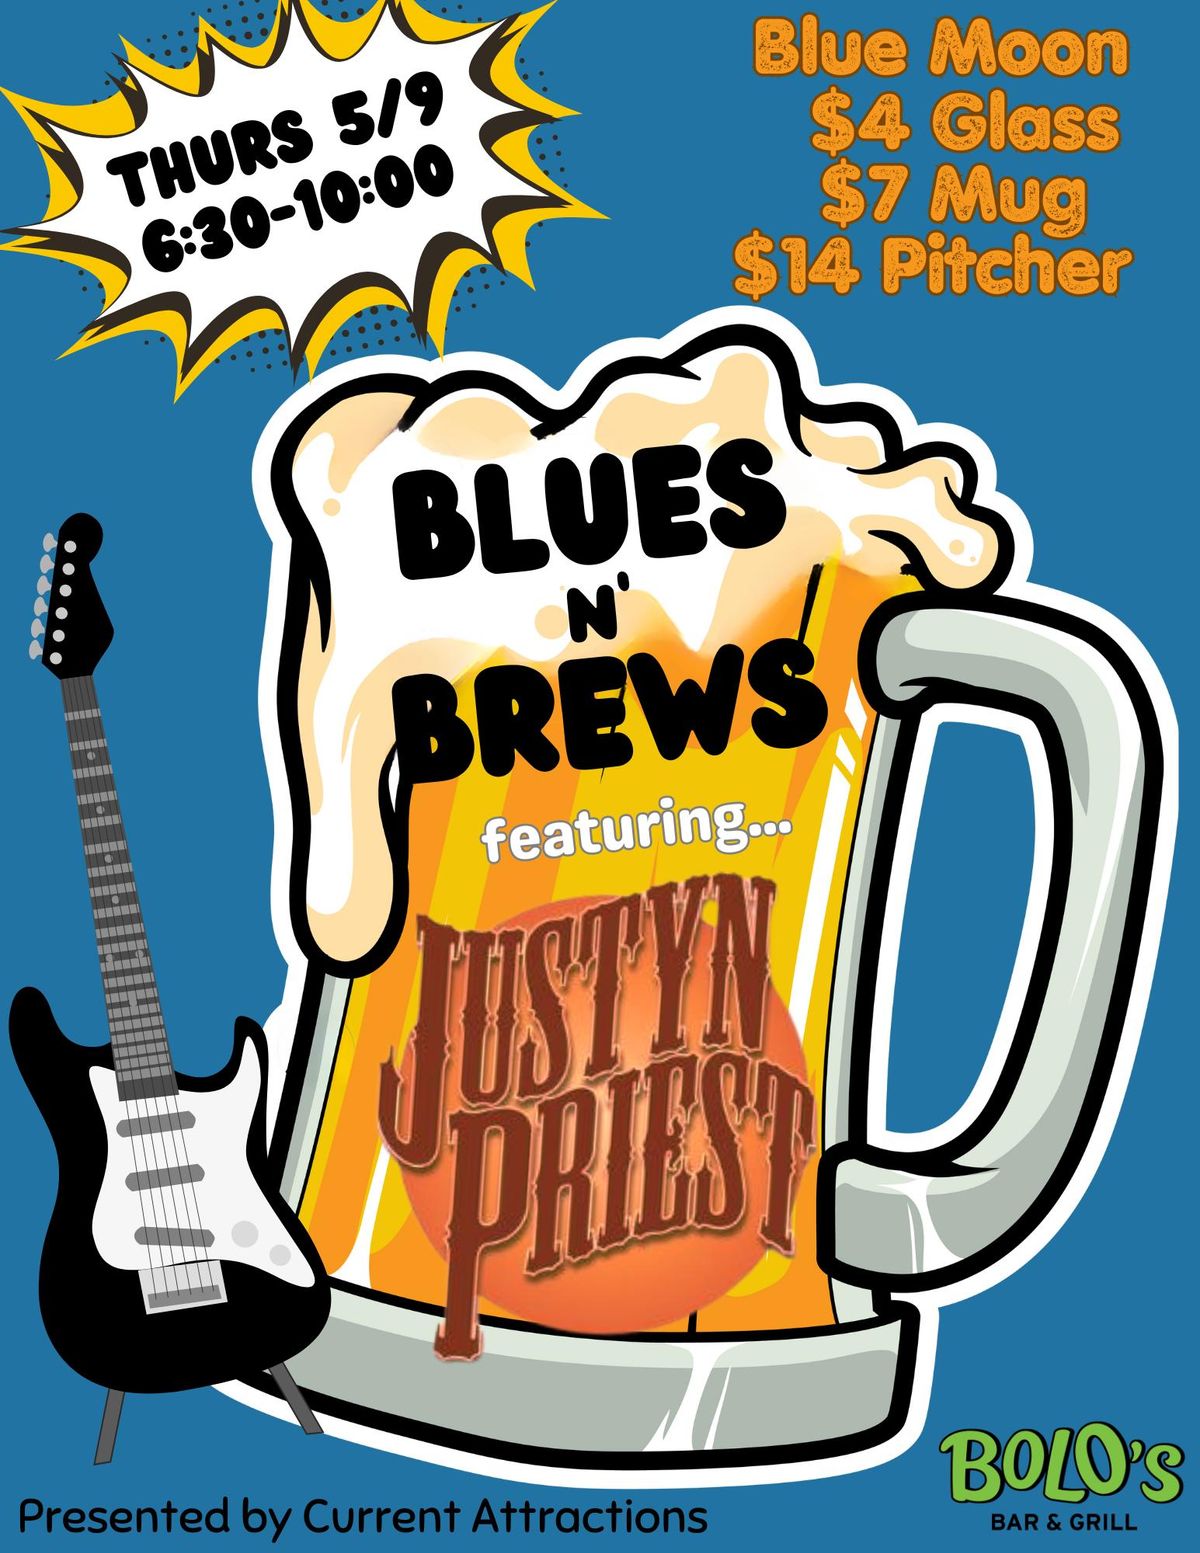 Blues & Brews with Justyn Priest at Bolo's!